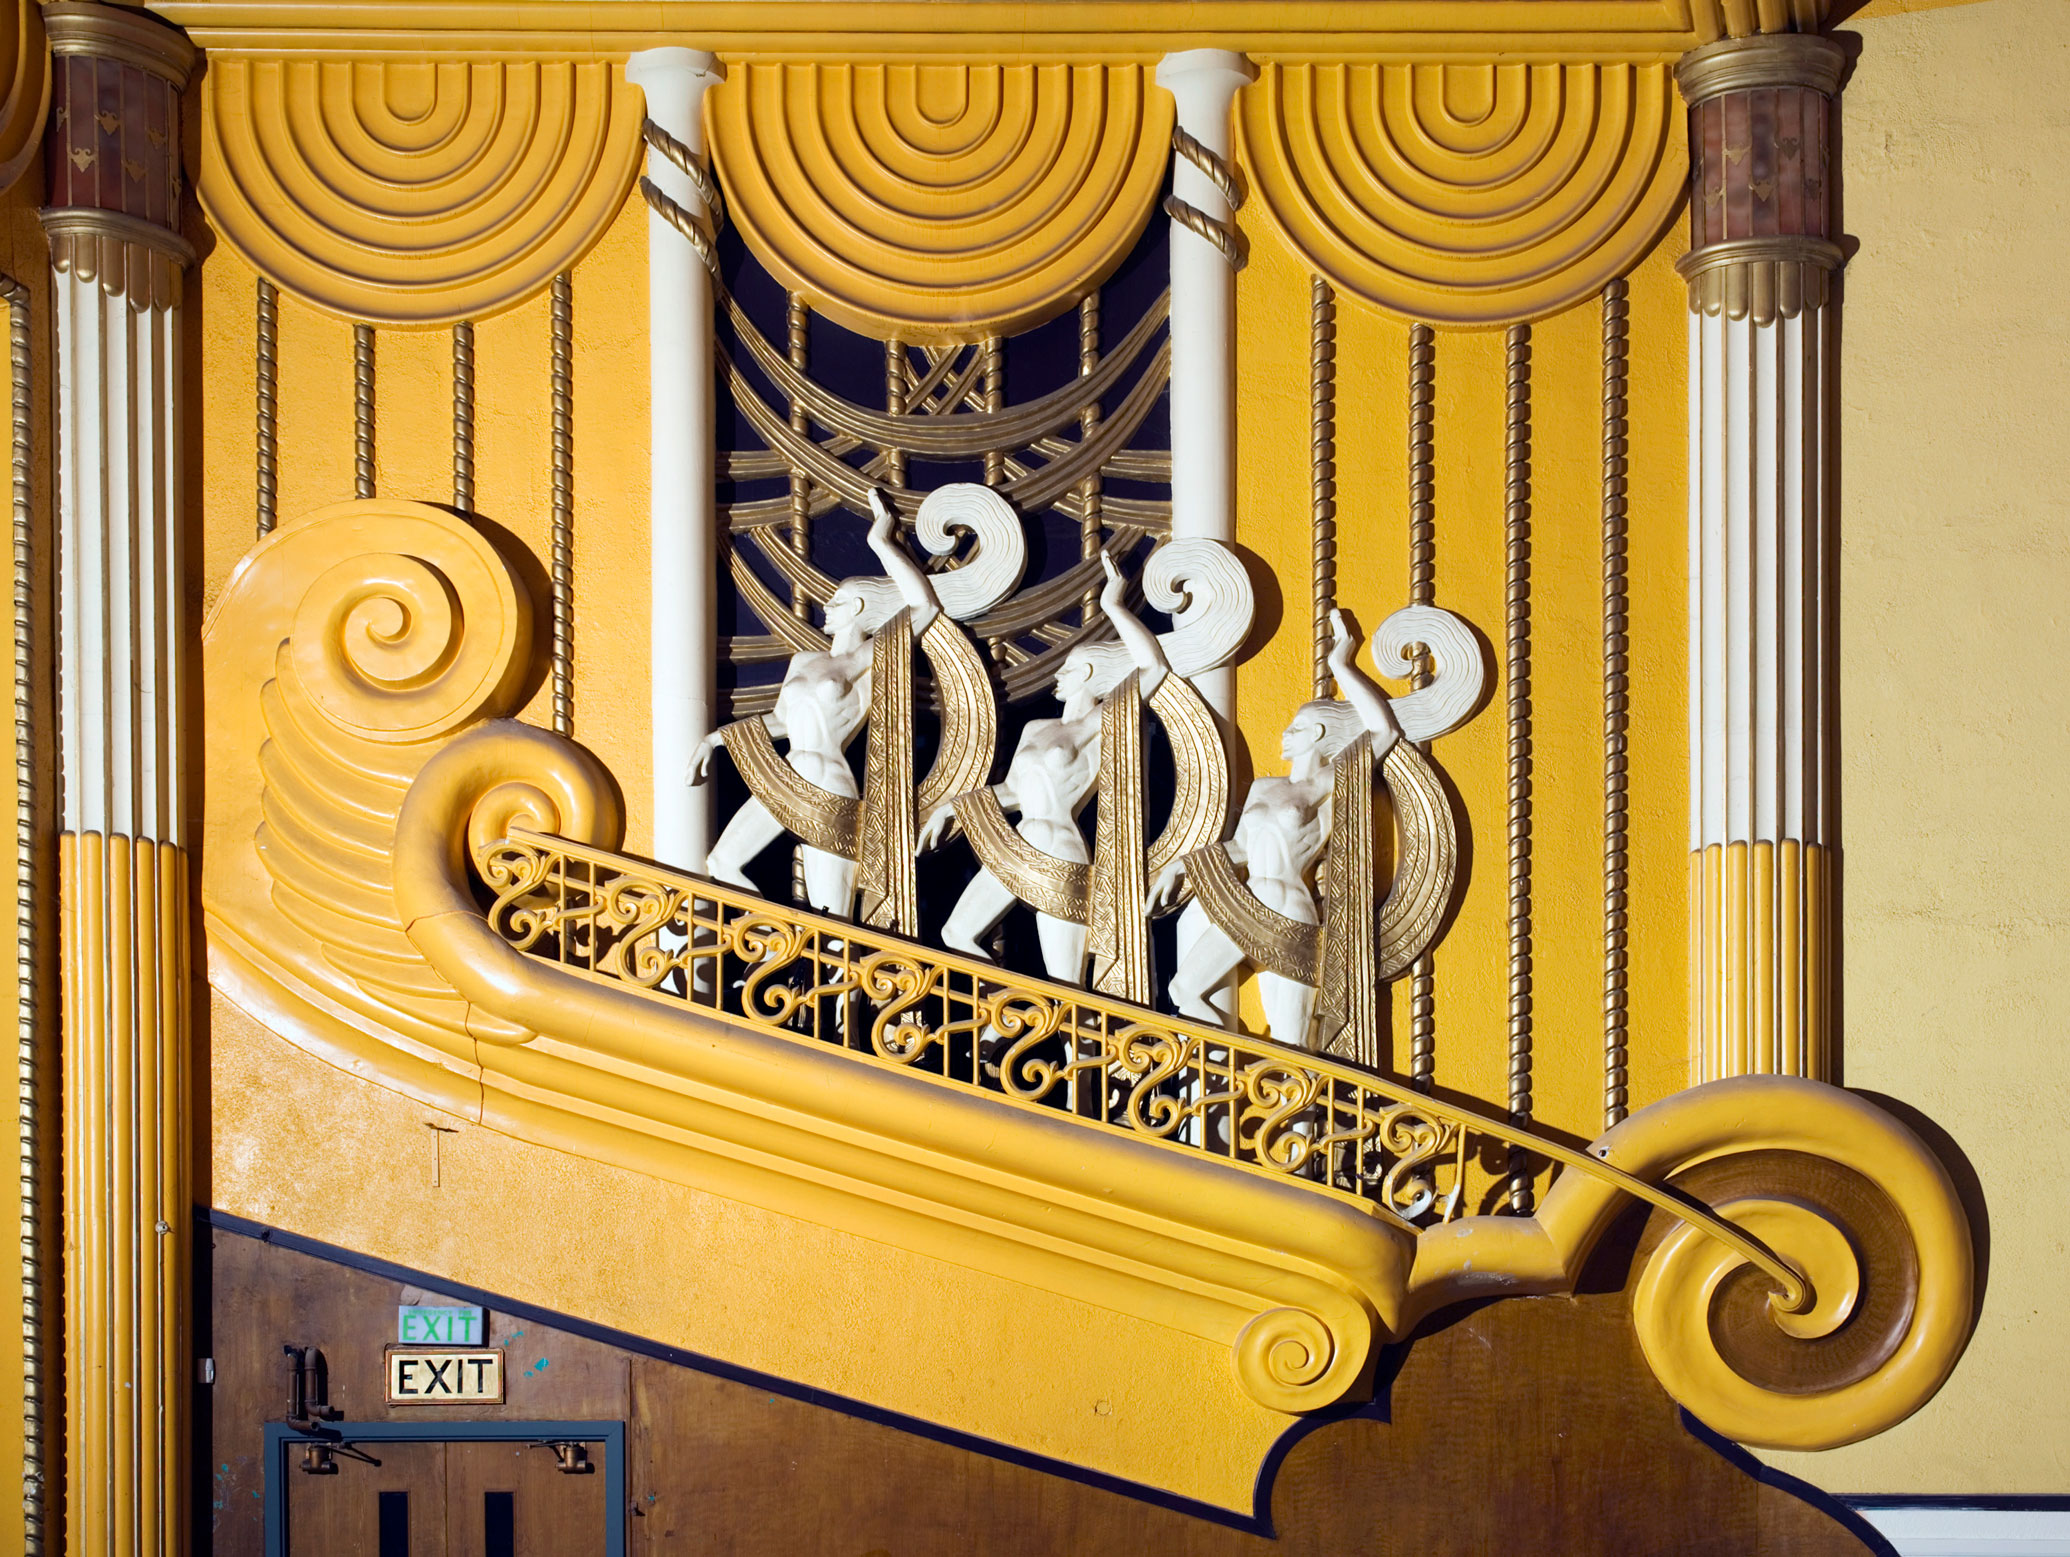 A detail of plaster decoration in vibrant yellow and white, including a row of three mythical figures in an art deco style.